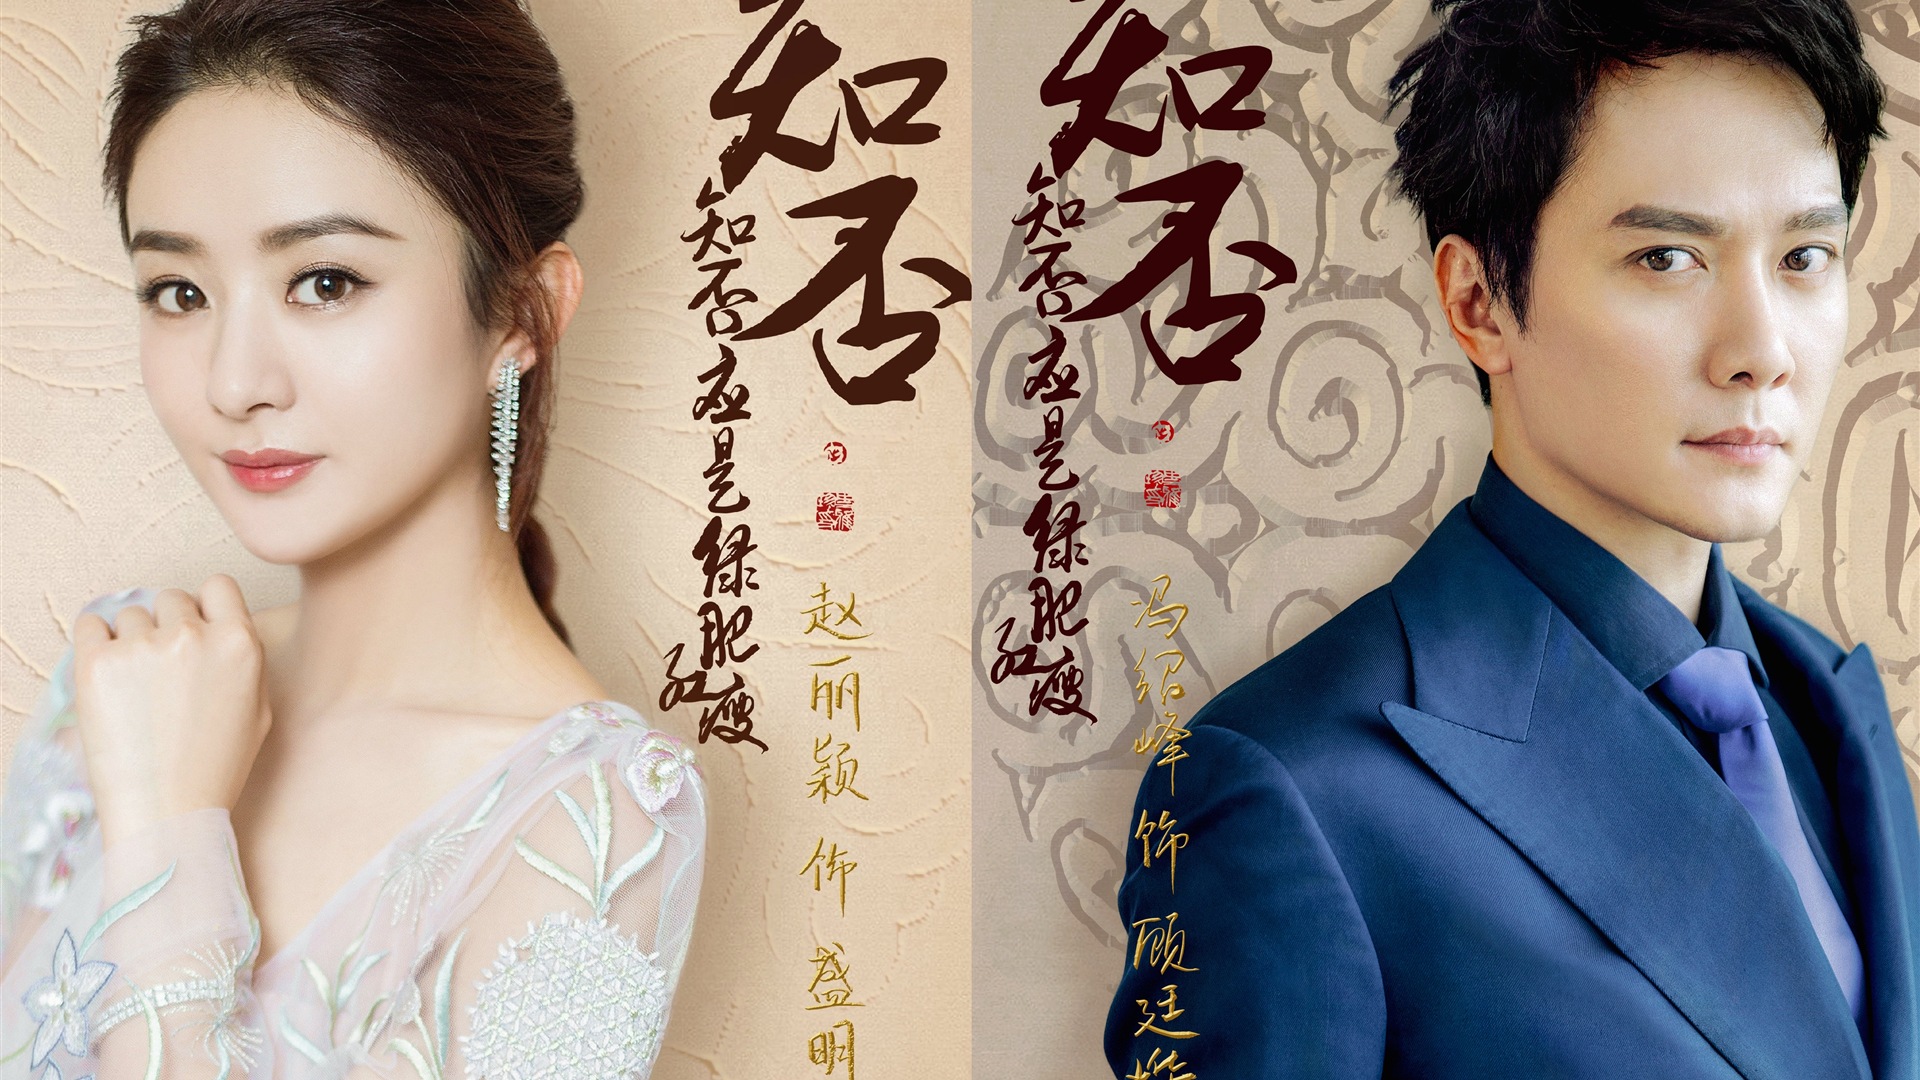 The Story Of MingLan, TV series HD wallpapers #46 - 1920x1080